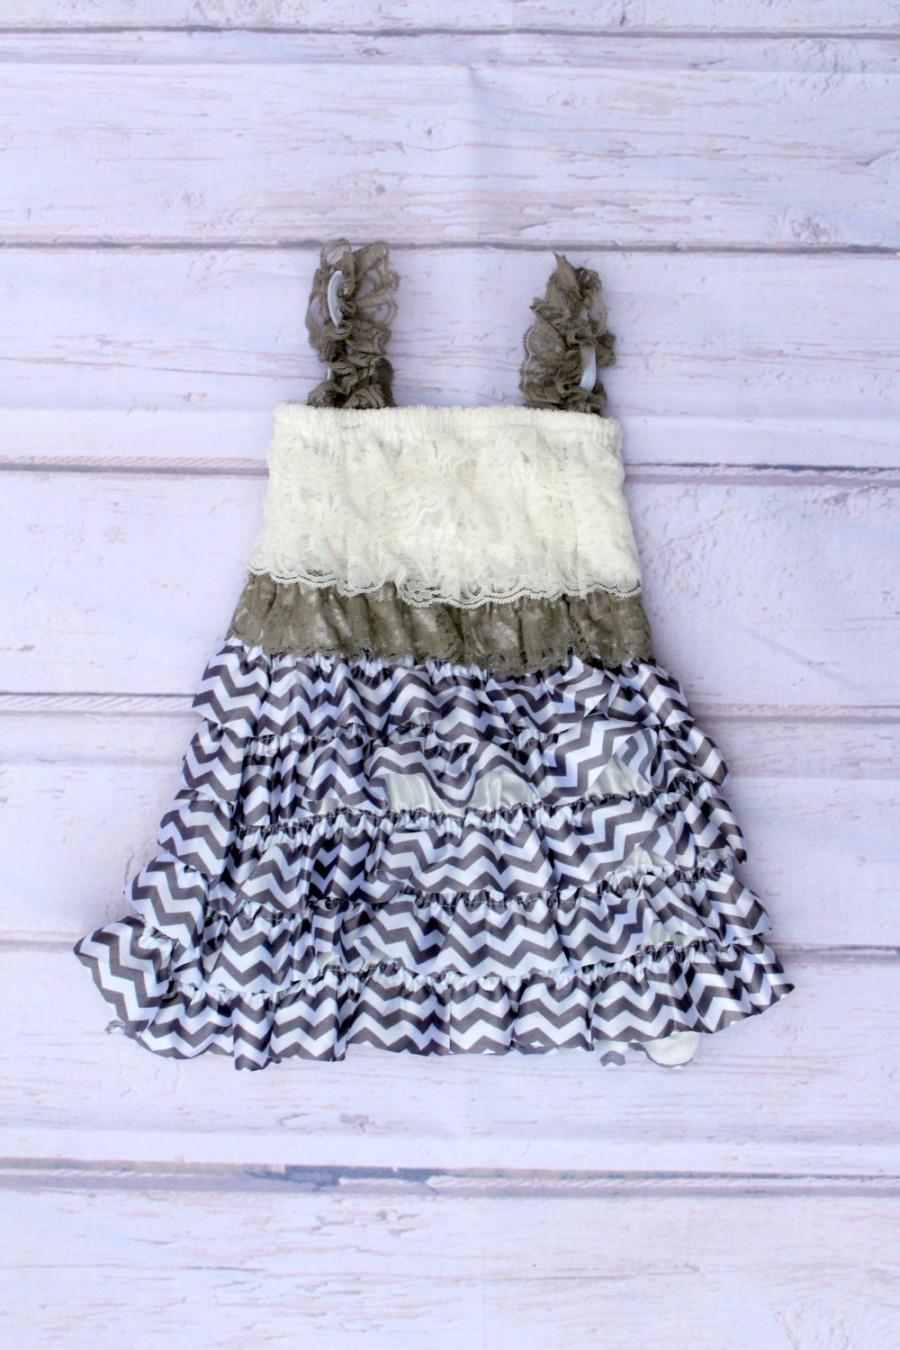 Wedding - Girls Lace Dress..Birthday Outfit Flower Girl Dress..Vintage Tea Party Dress and Outfit..Baby Girl First Birthday Dress..Petti Dress